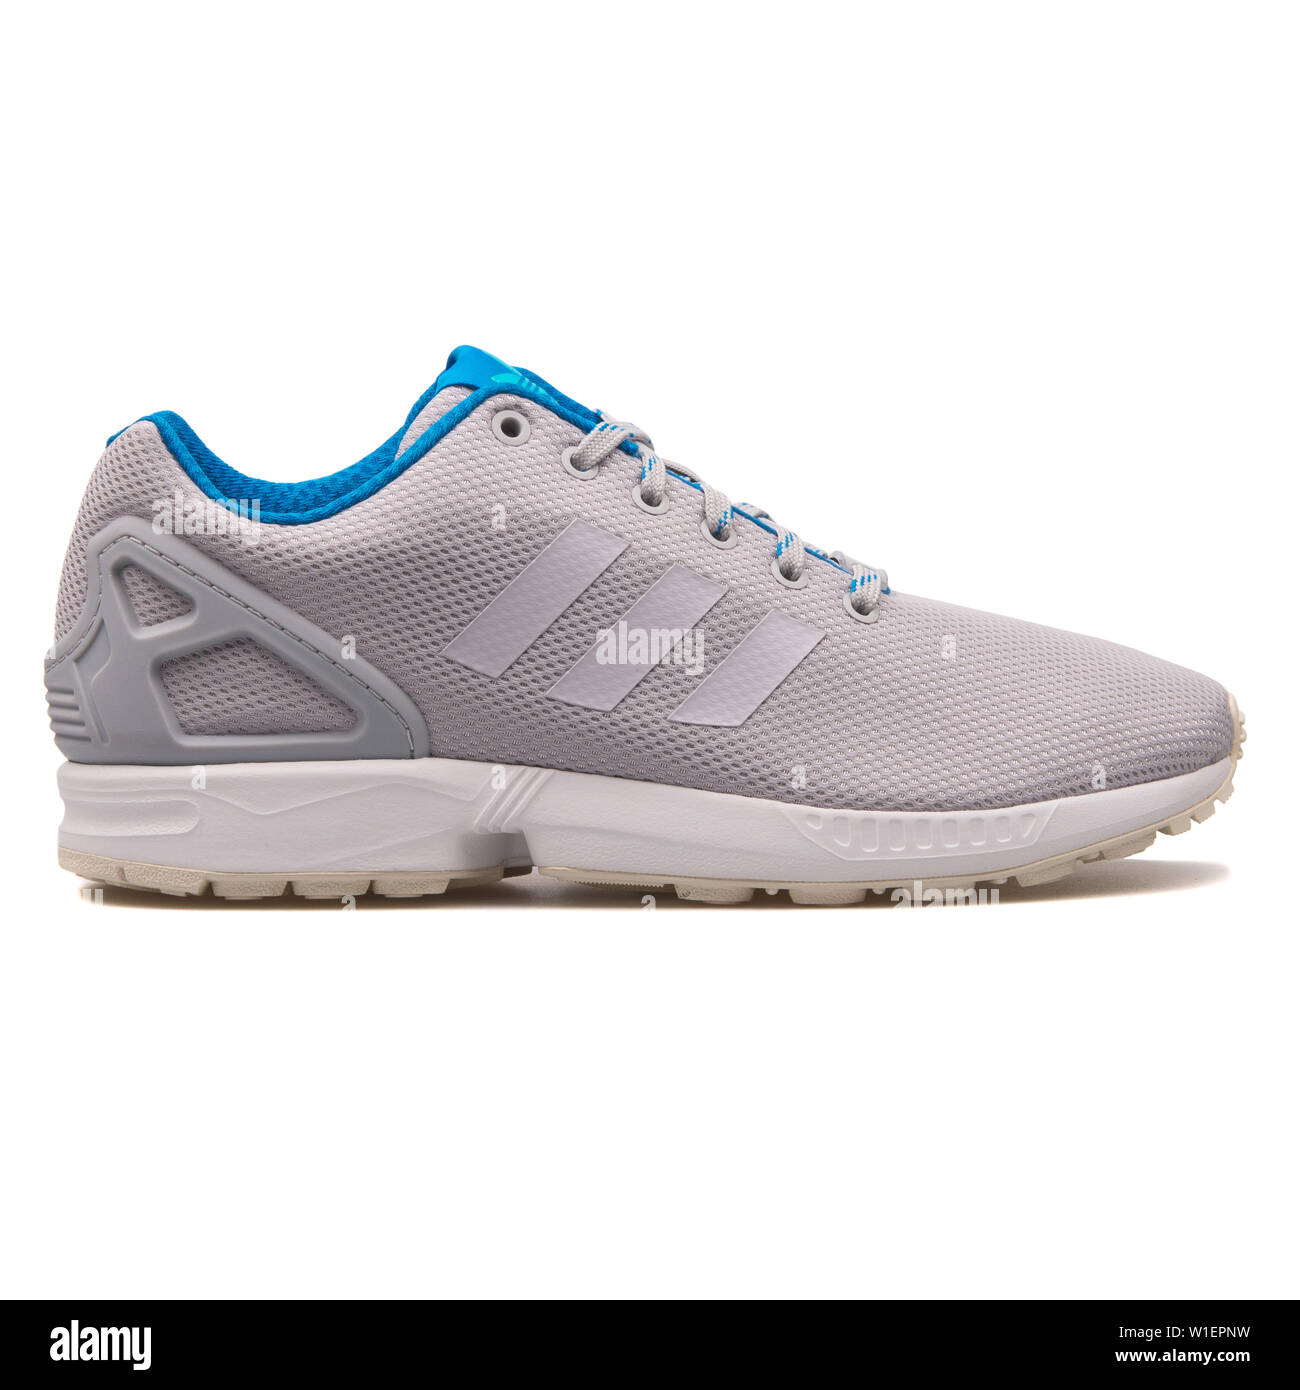 Adidas ZX Flux grey and blue sneaker on 